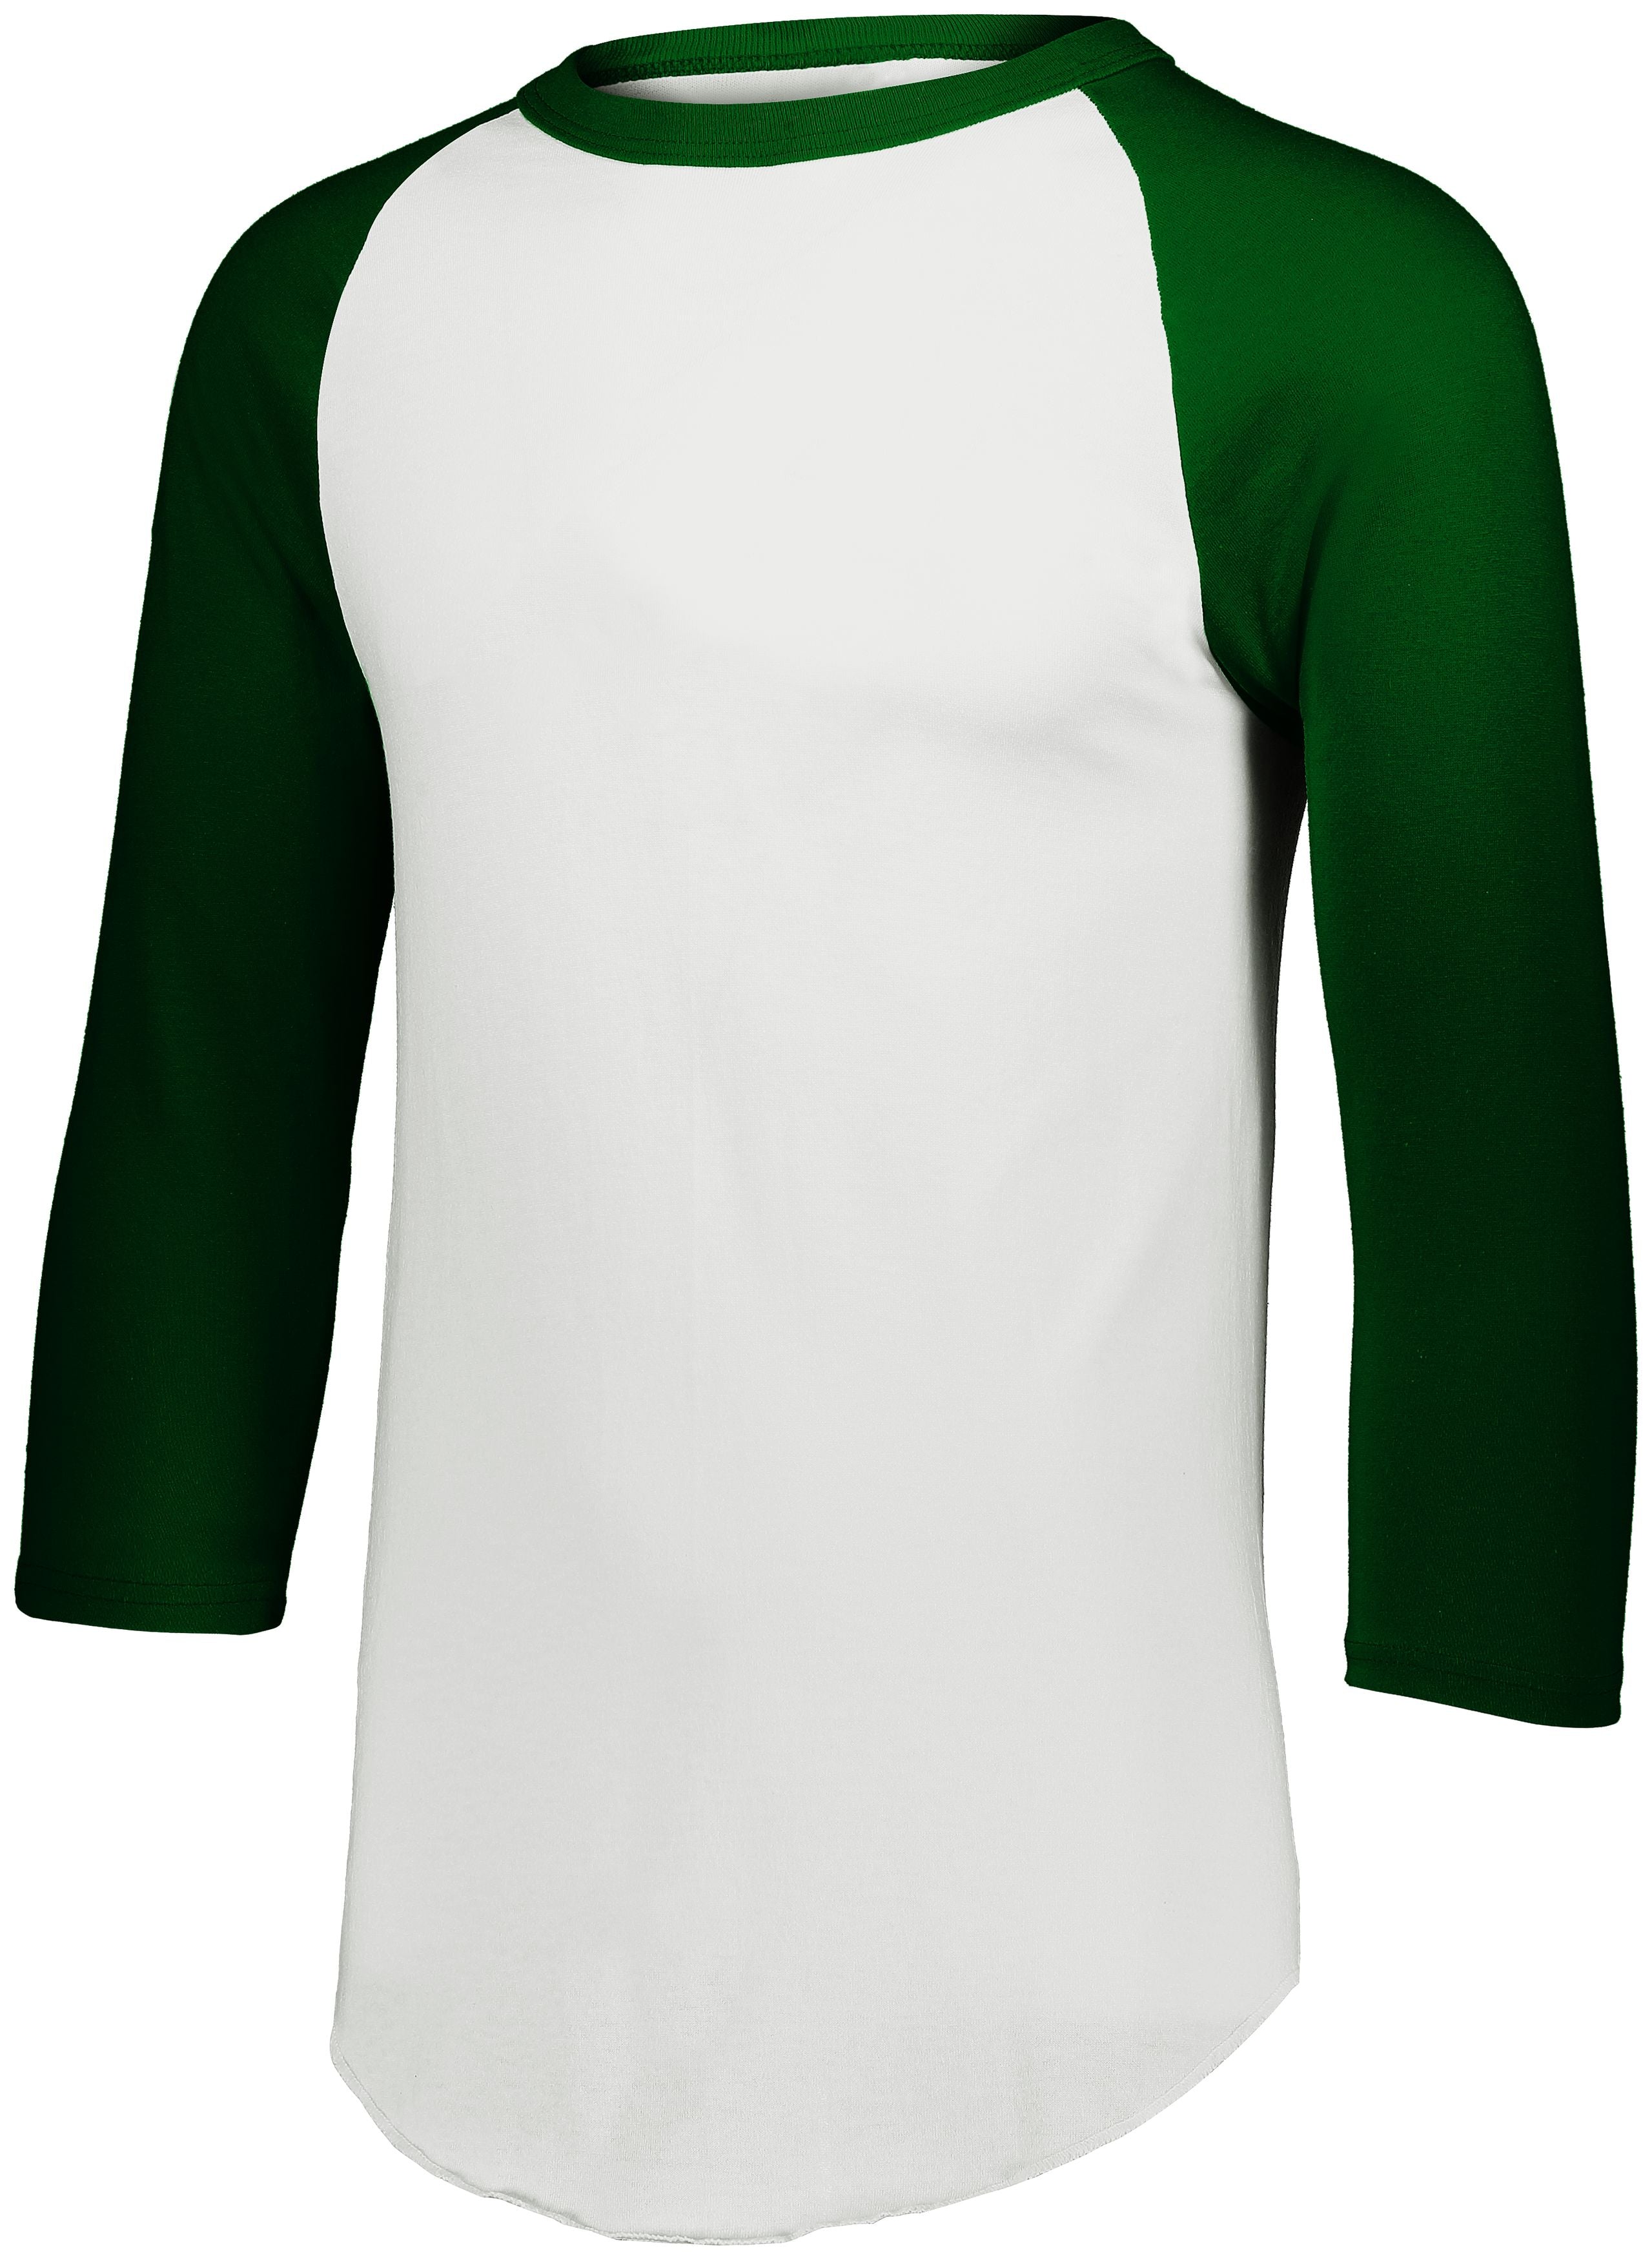 Augusta Sportswear Youth Baseball Jersey 2.0 in White/Dark Green  -Part of the Youth, Youth-Jersey, Augusta-Products, Baseball, Shirts, All-Sports, All-Sports-1 product lines at KanaleyCreations.com